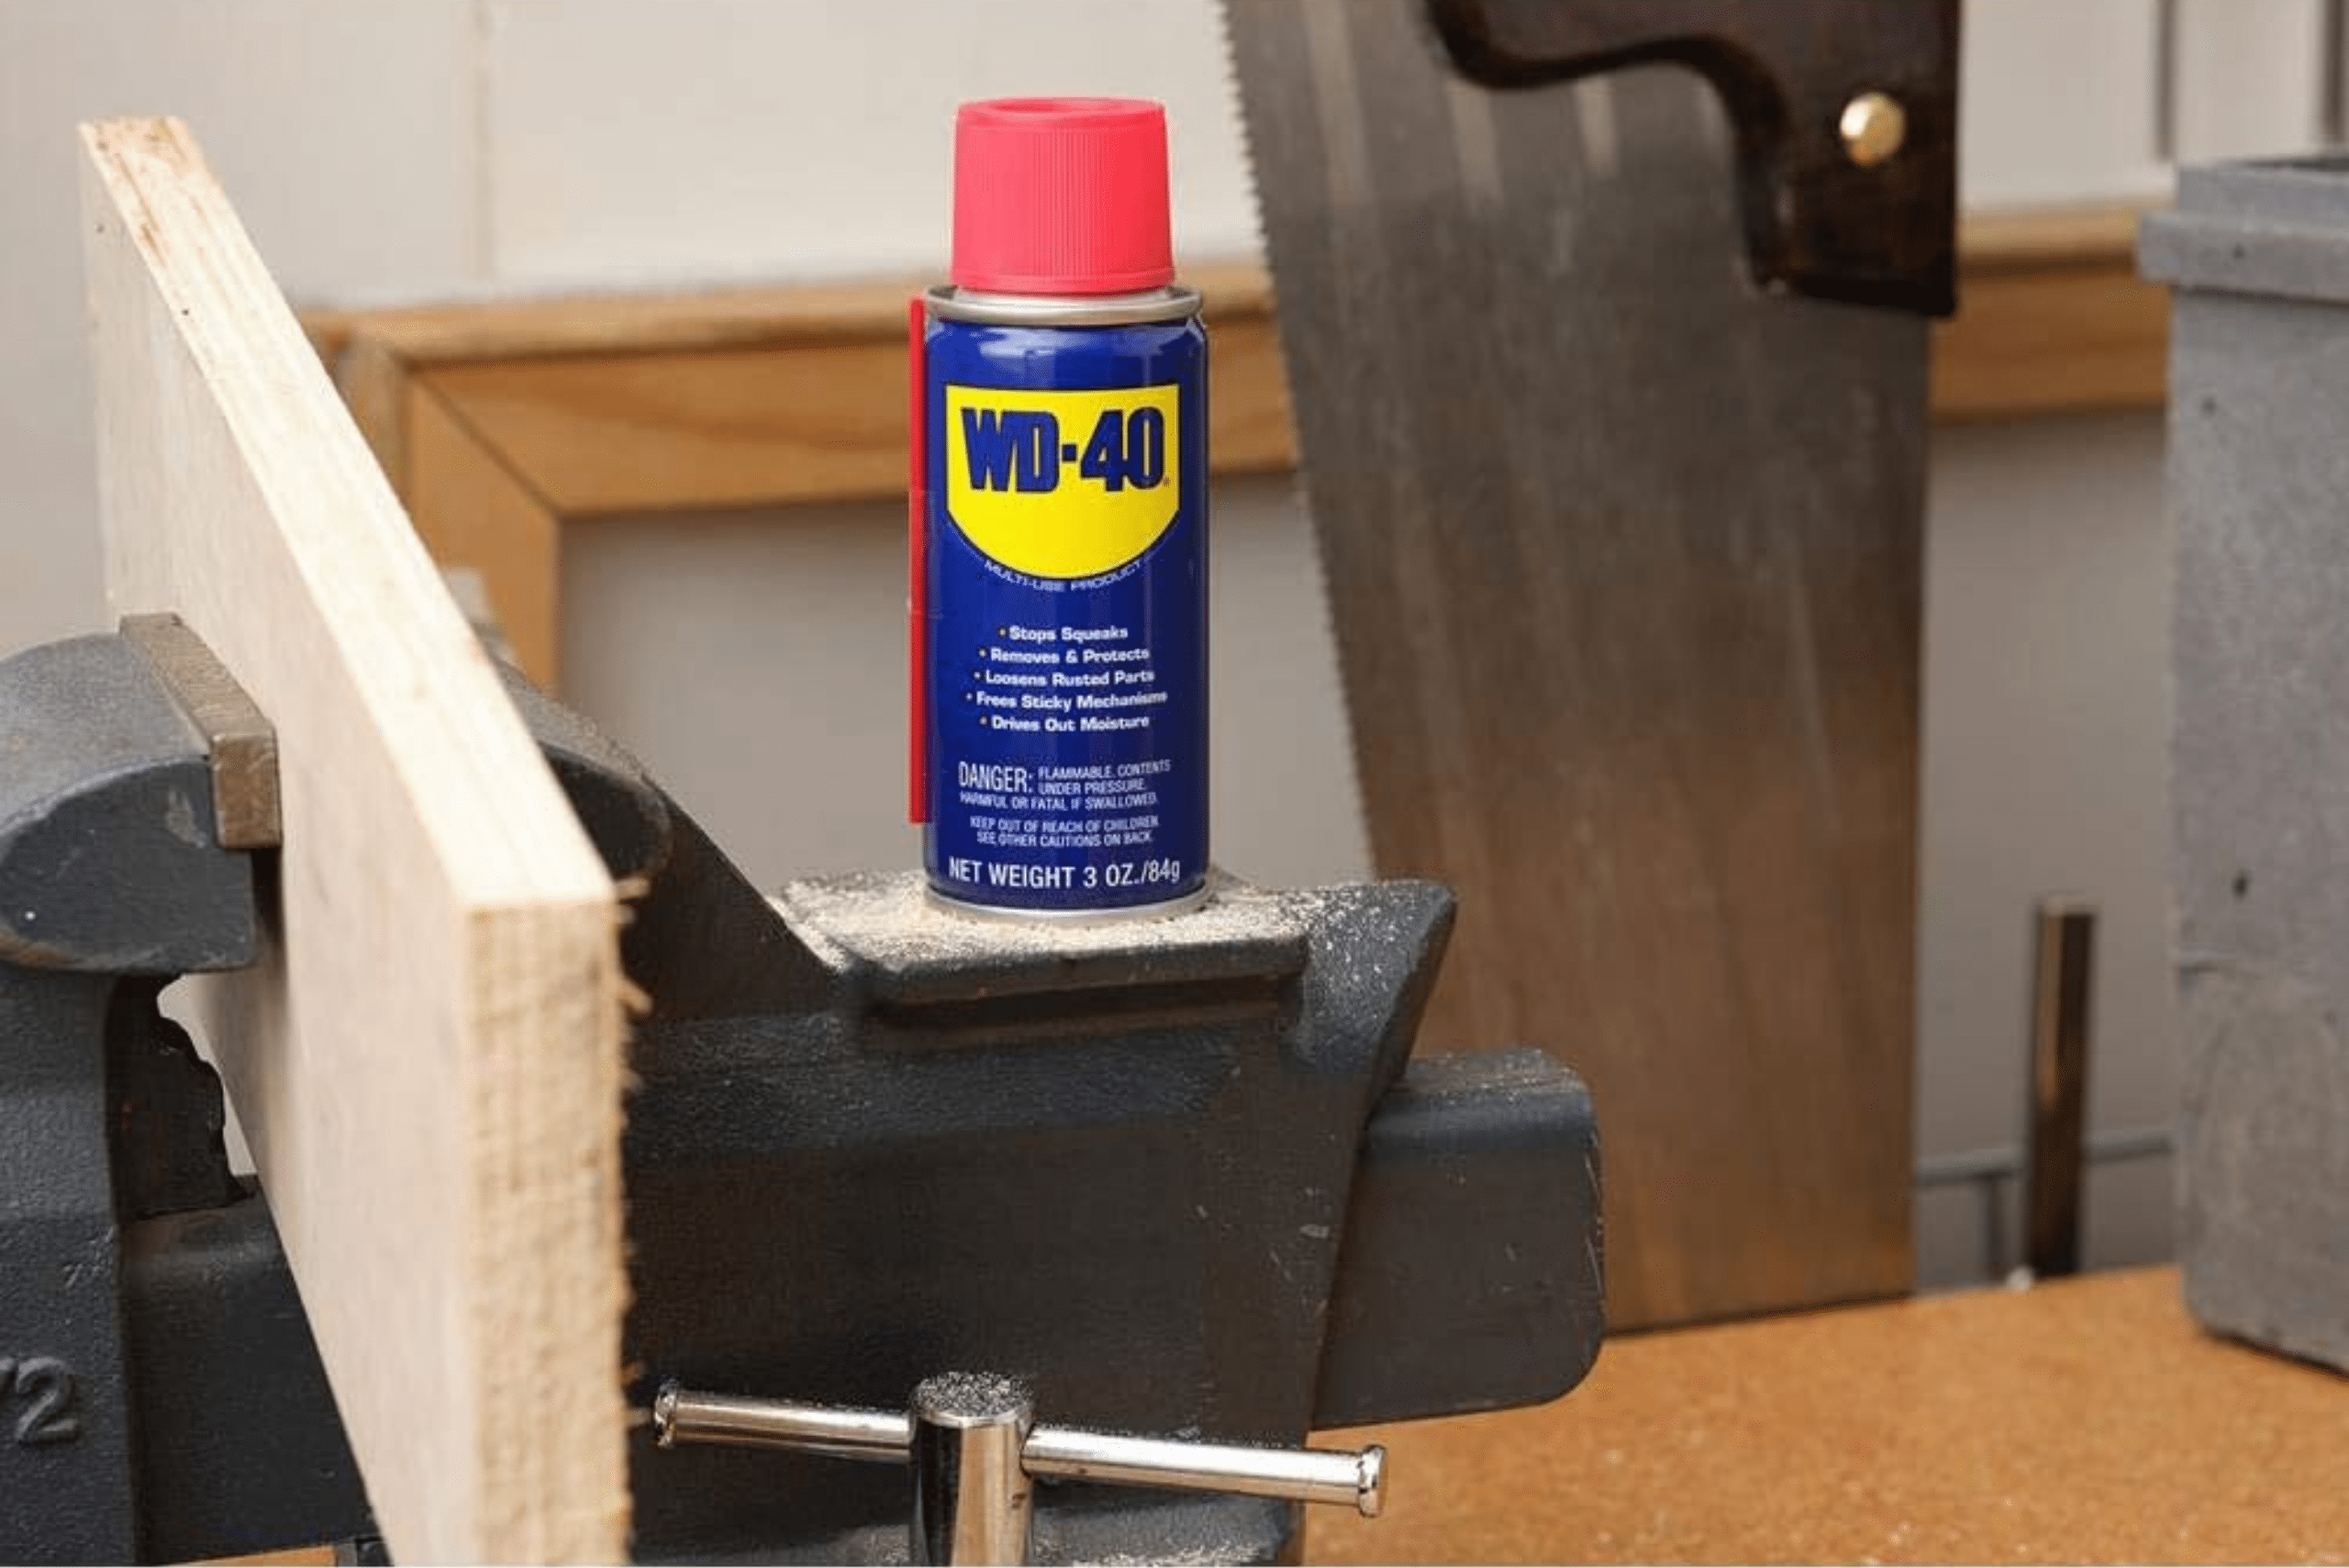 A can of WD-40 on a workbench vice.